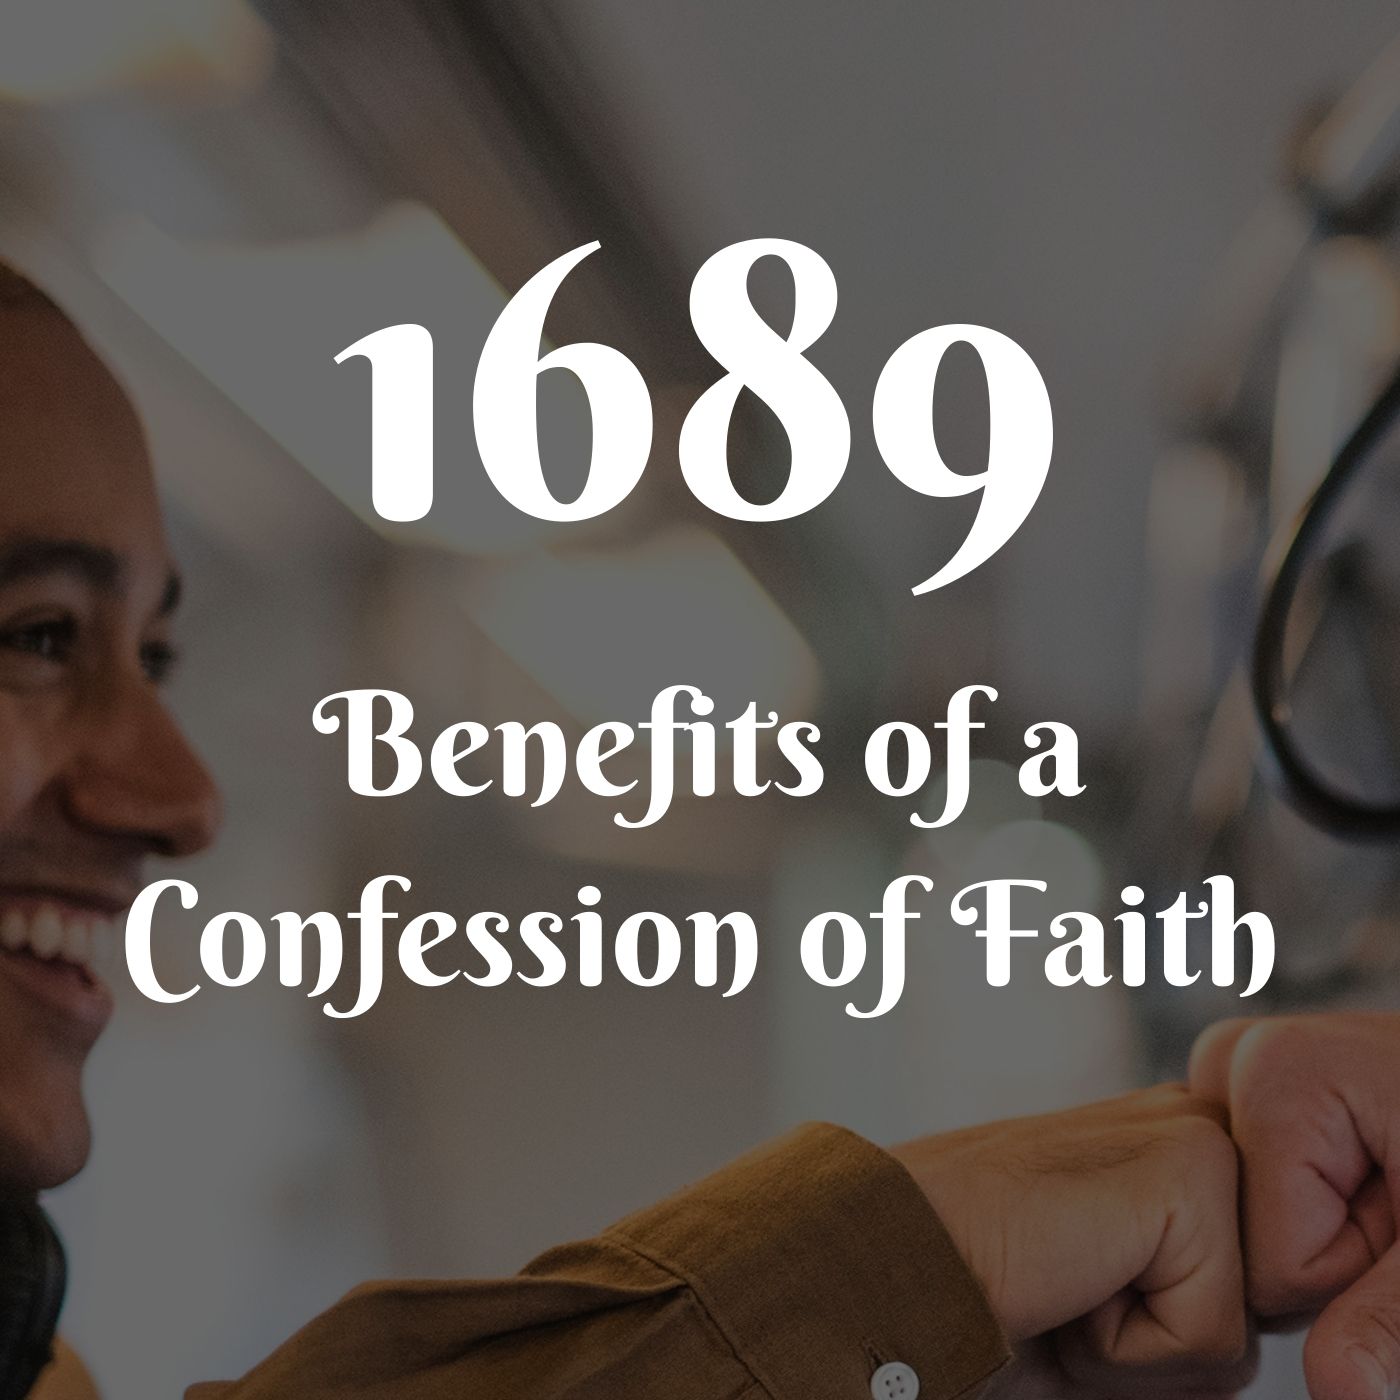 #27: 1689 - Benefits of a Confession of Faith